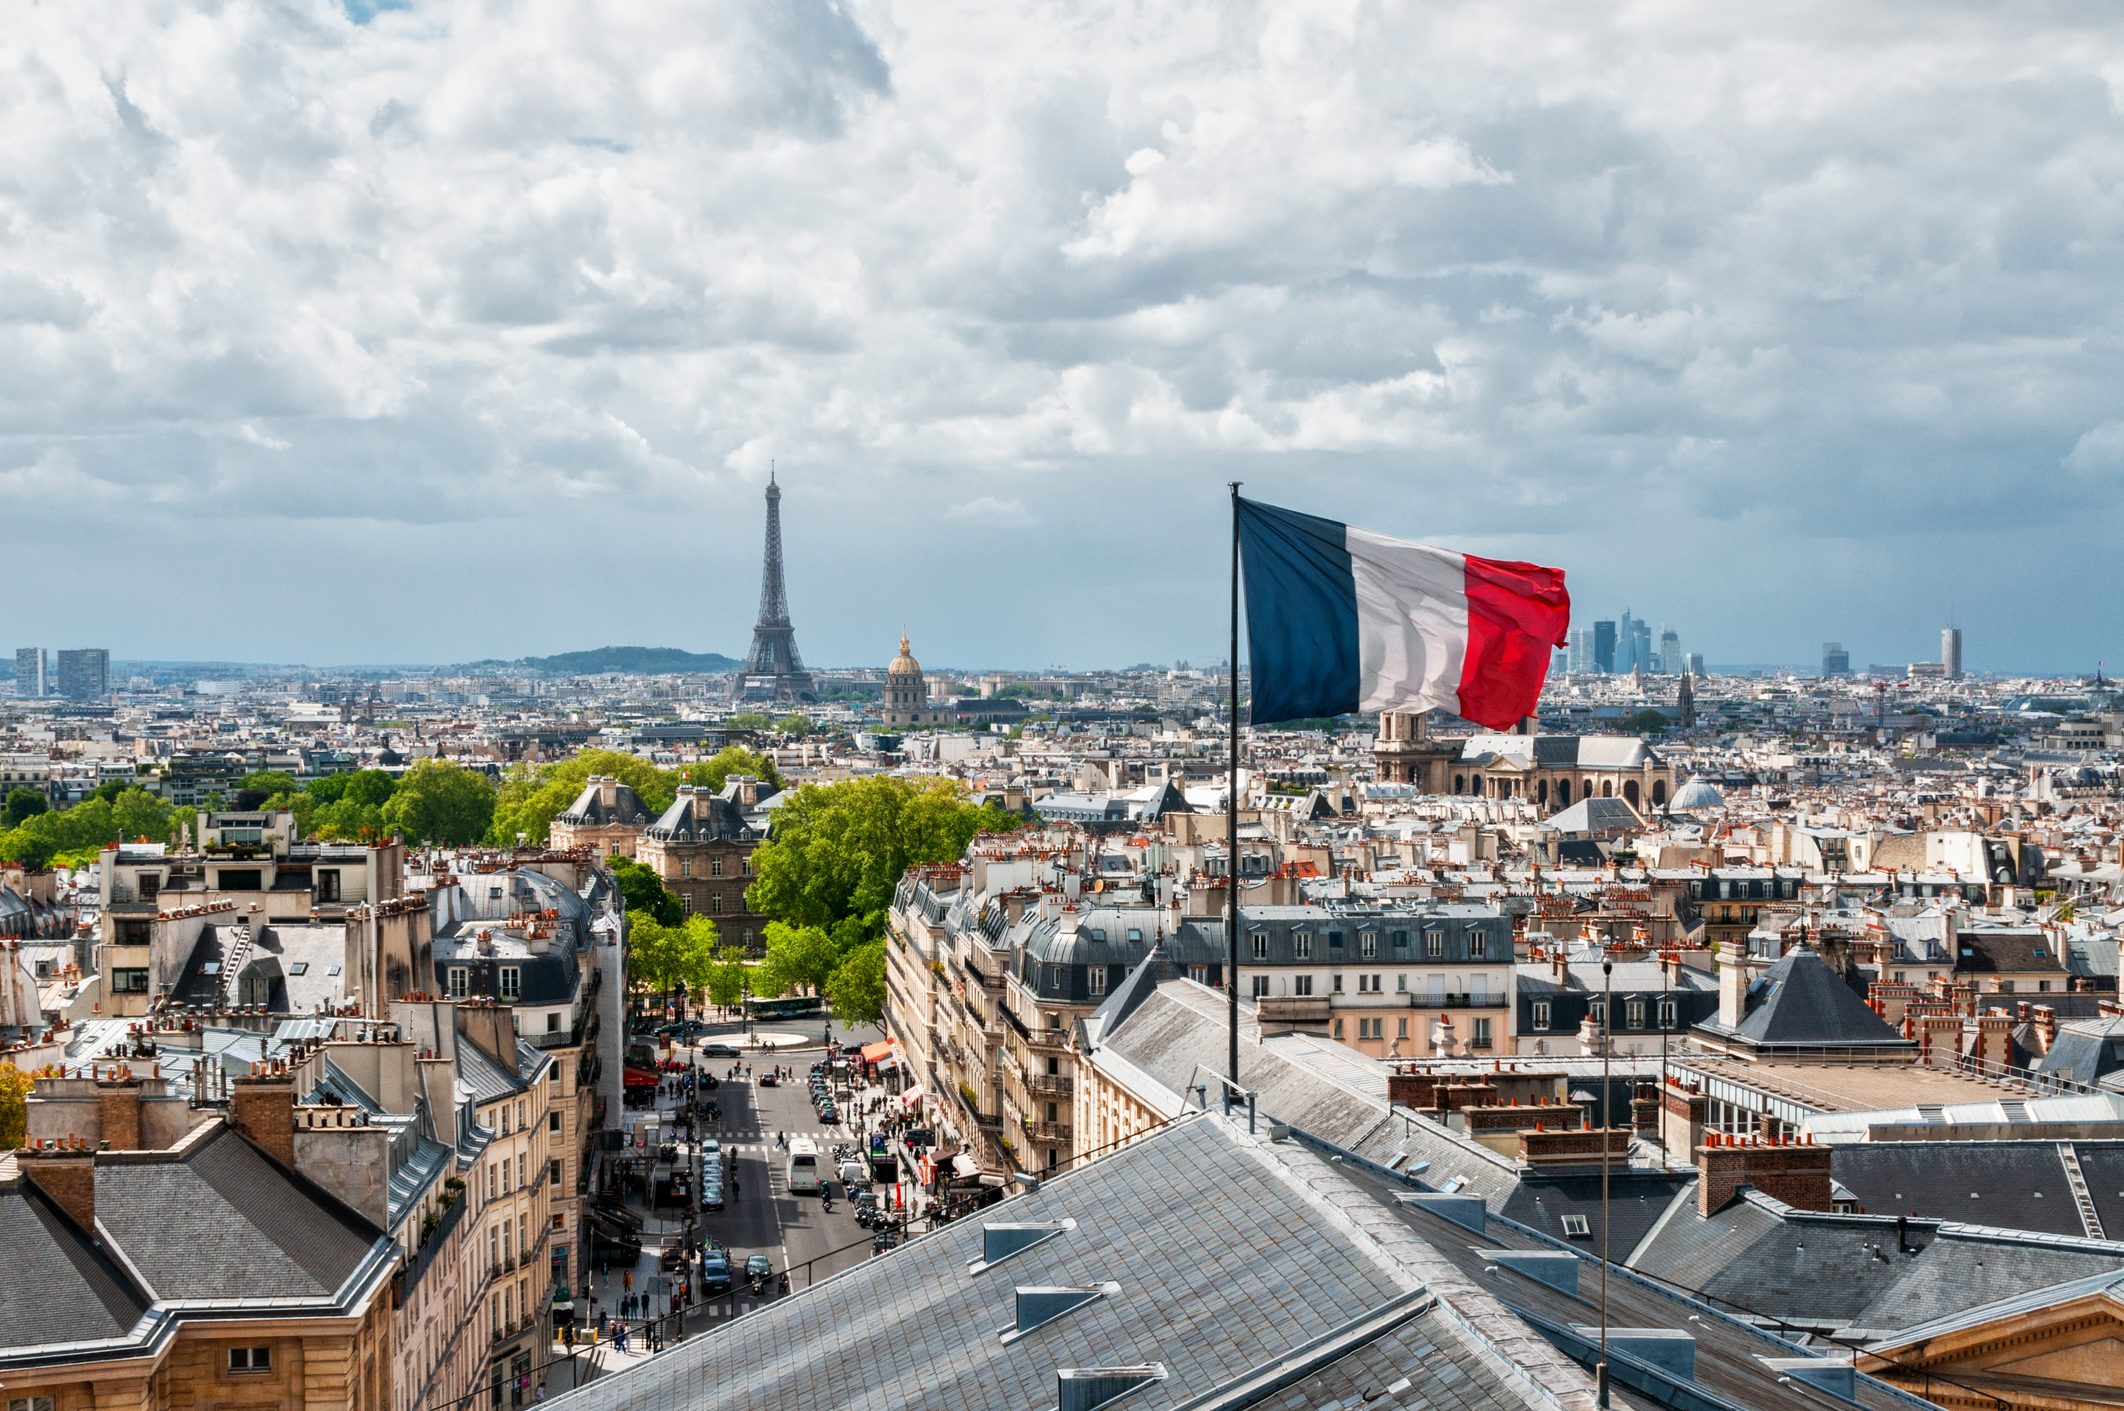 View on Paris roofs, with Tour Eiffel in background. Panthéon, in Paris, France. May 21, 2021.